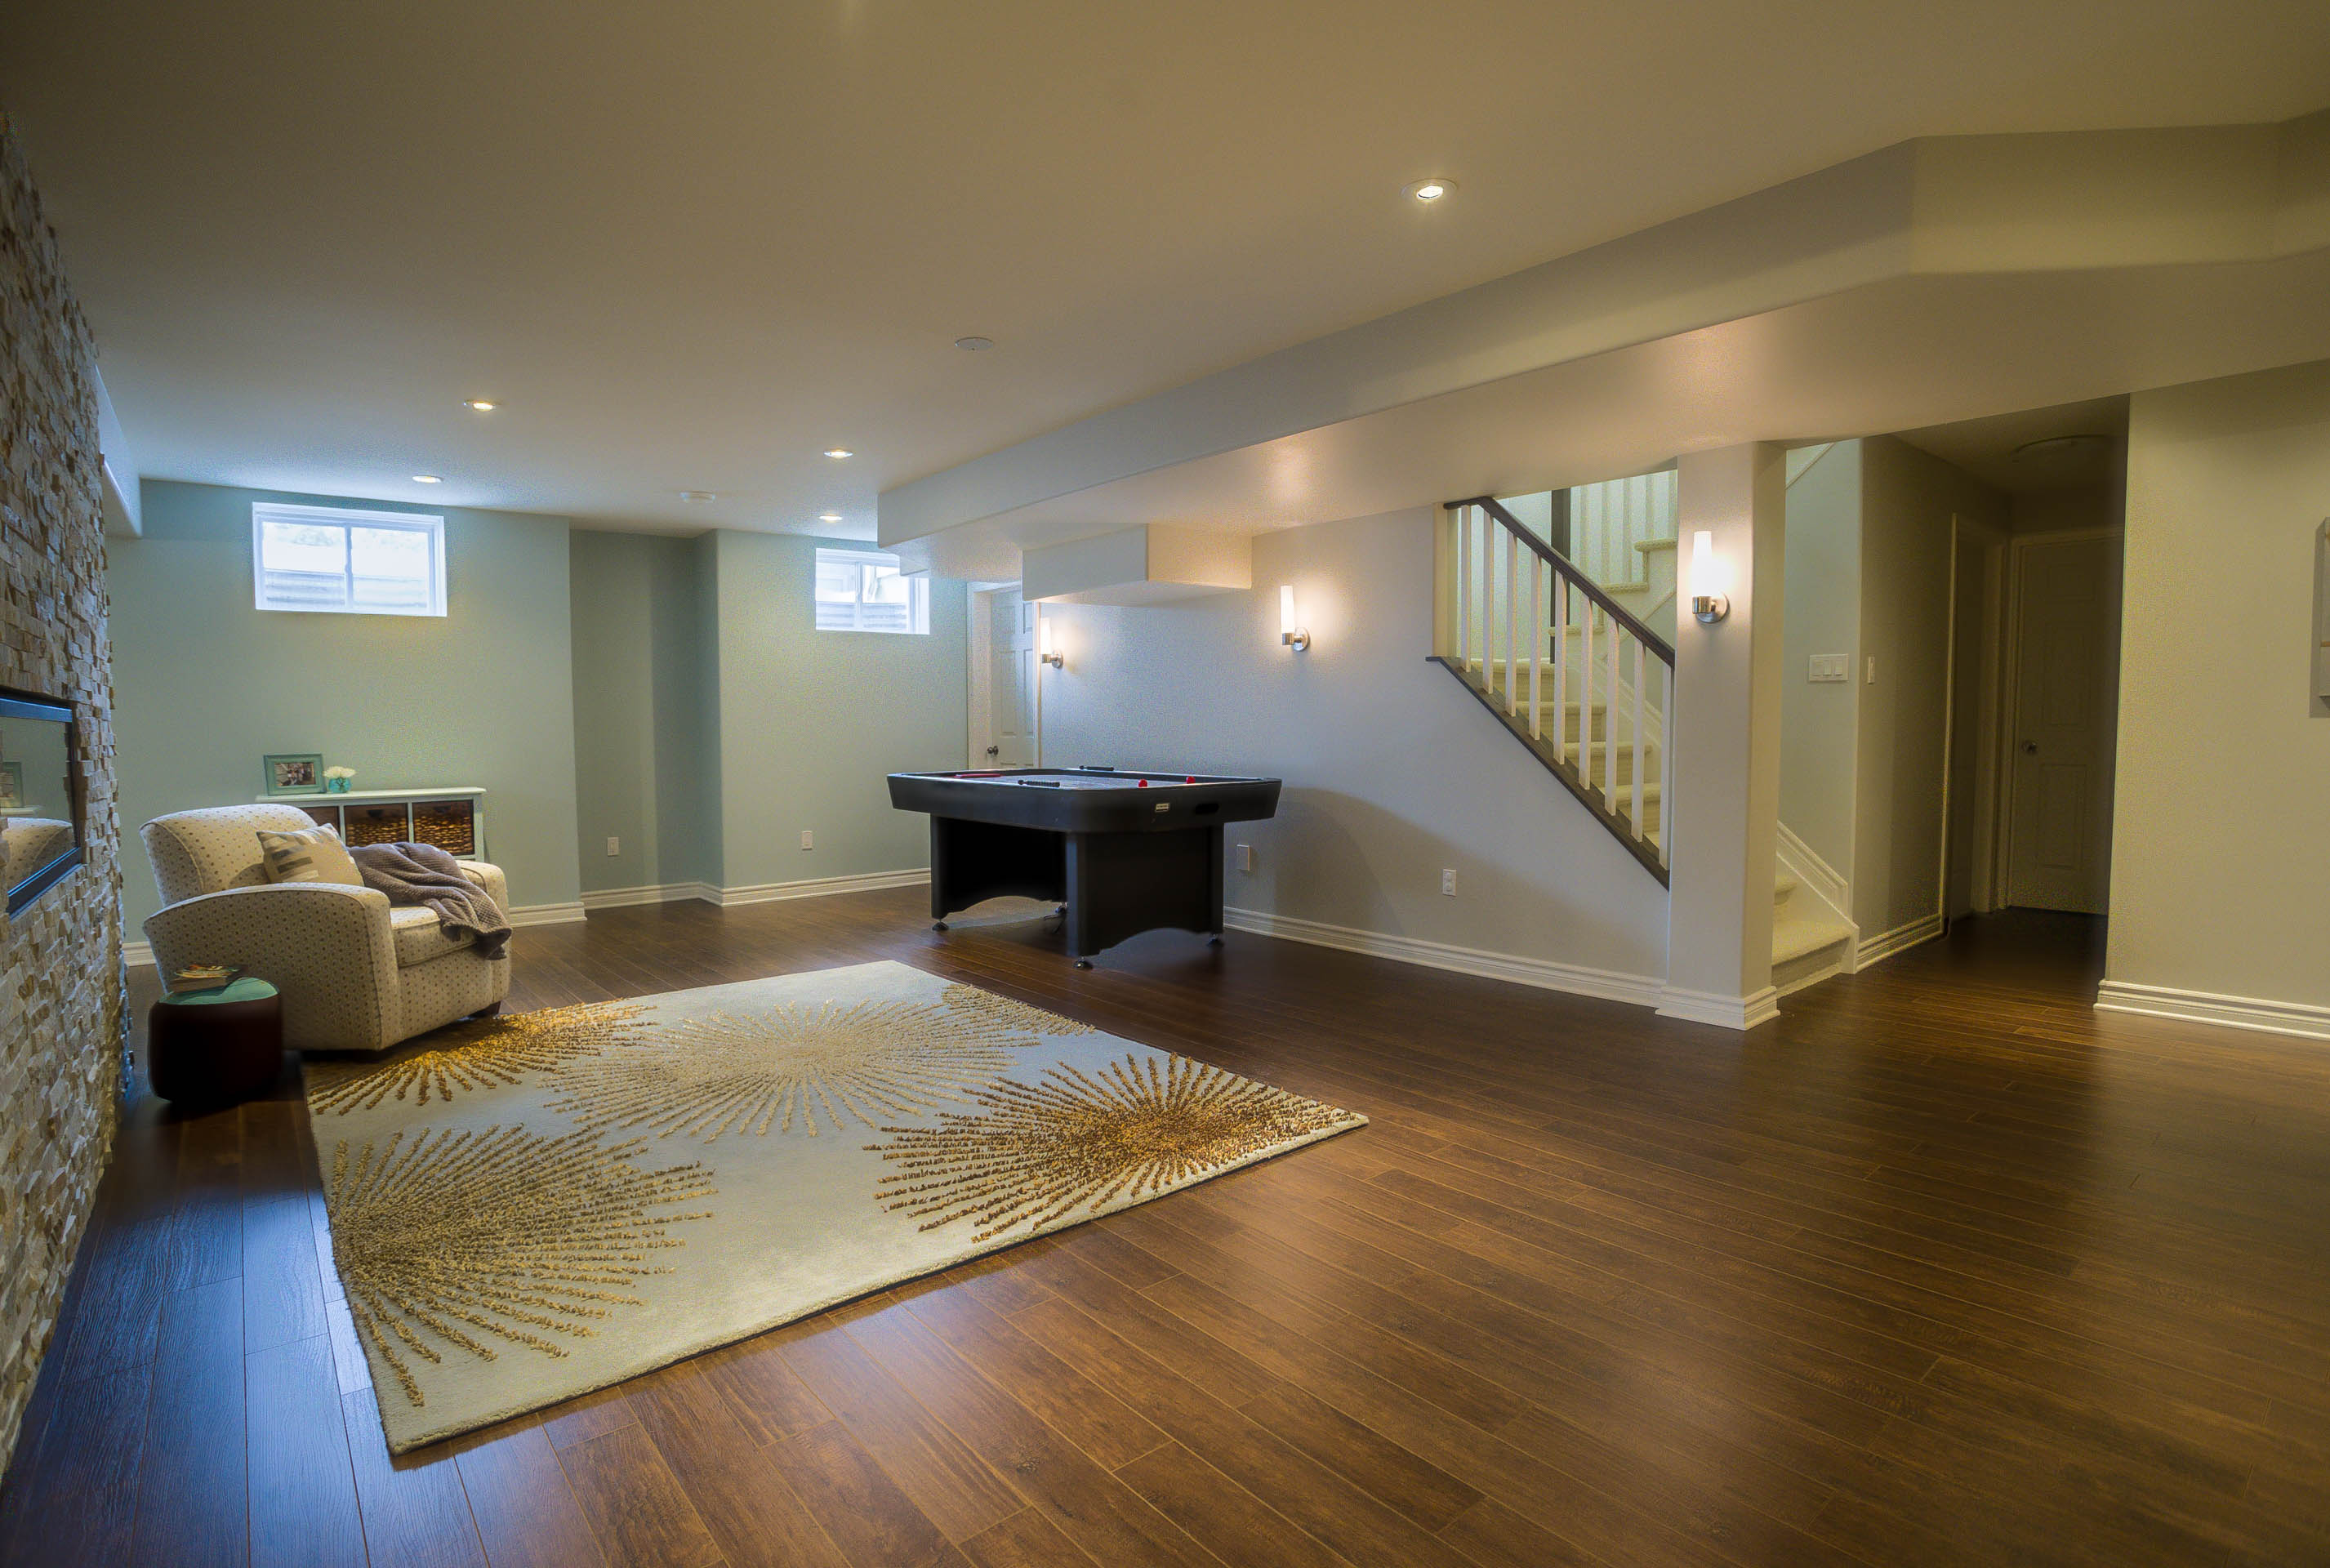 Laminate Flooring Is A Great Option For, Is Laminate Flooring Good For Basement